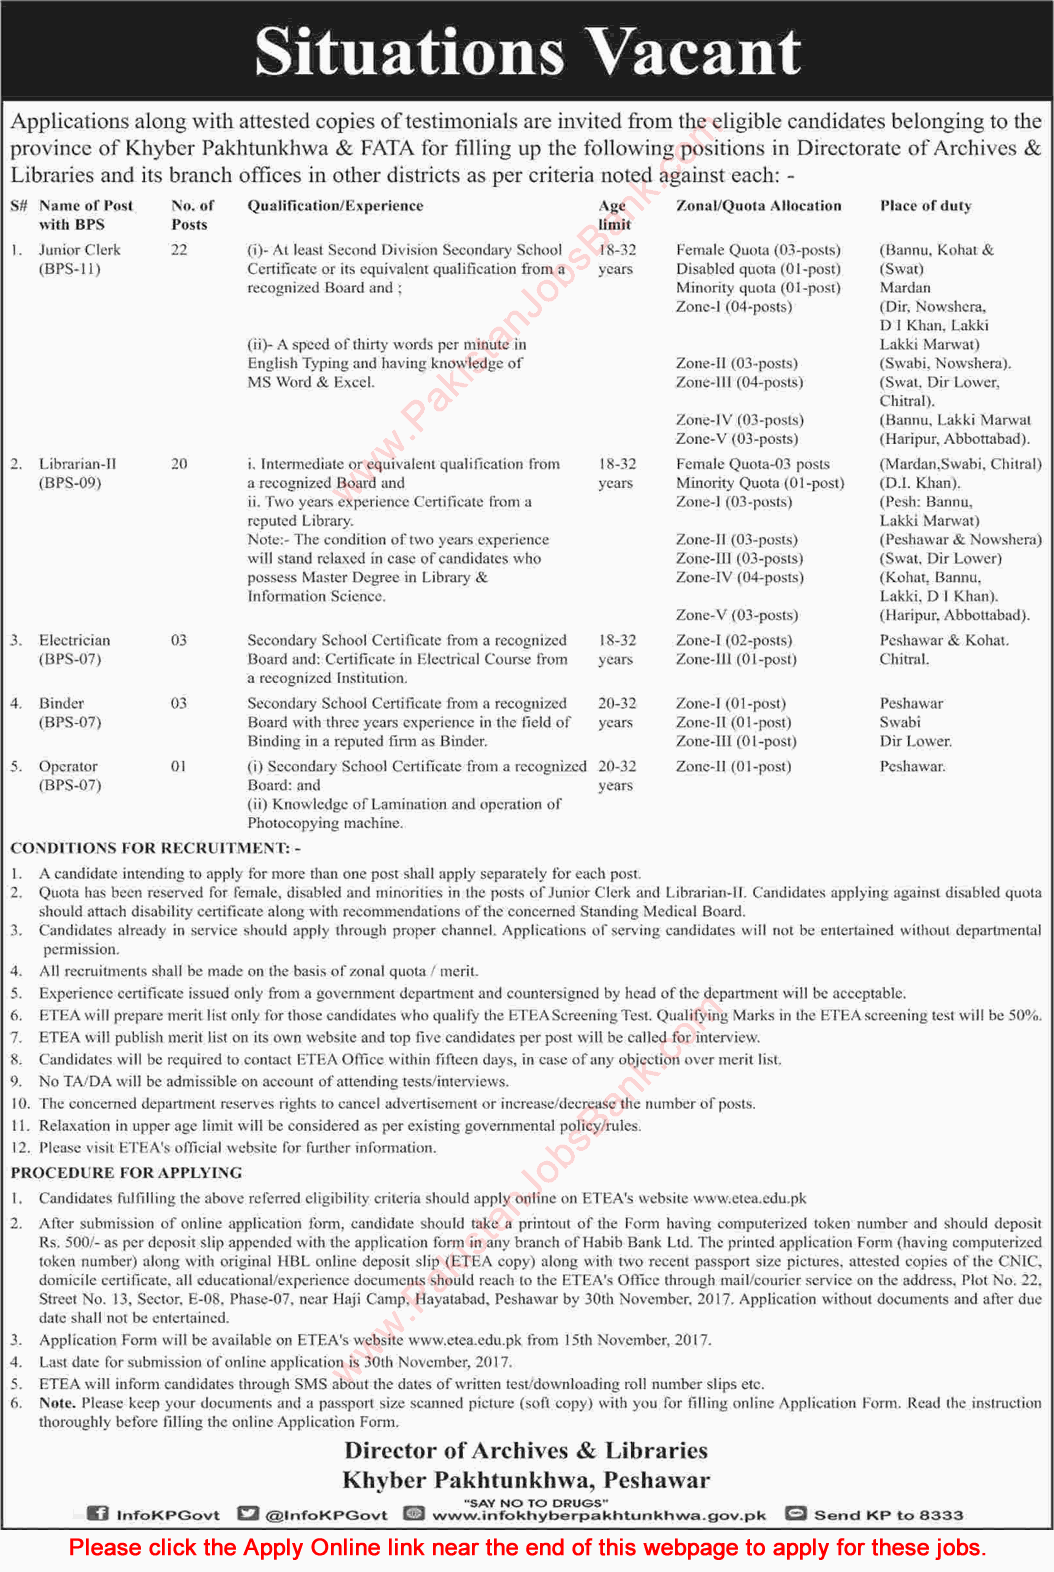 Directorate of Archives and Libraries KPK Jobs 2017 November Apply Online Clerks, Librarians & Others Latest